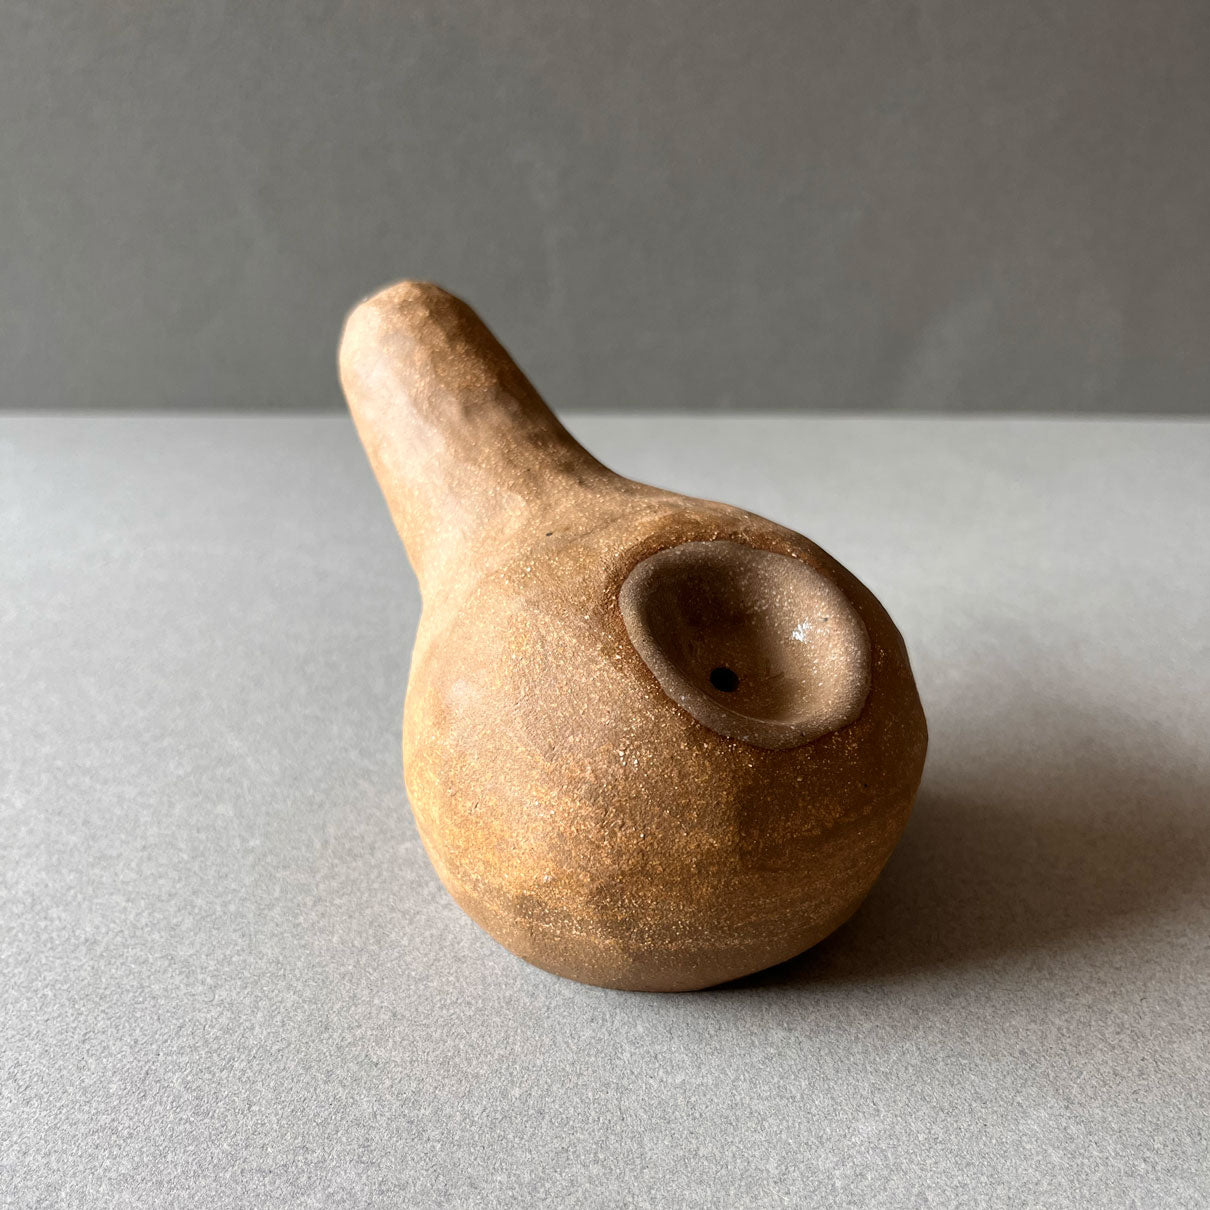 A gourd shaped, spherical body form in brown stoneware with hammered texture, featuring a large glazed inset bowl and rounded stem protrusion mouthpiece. 